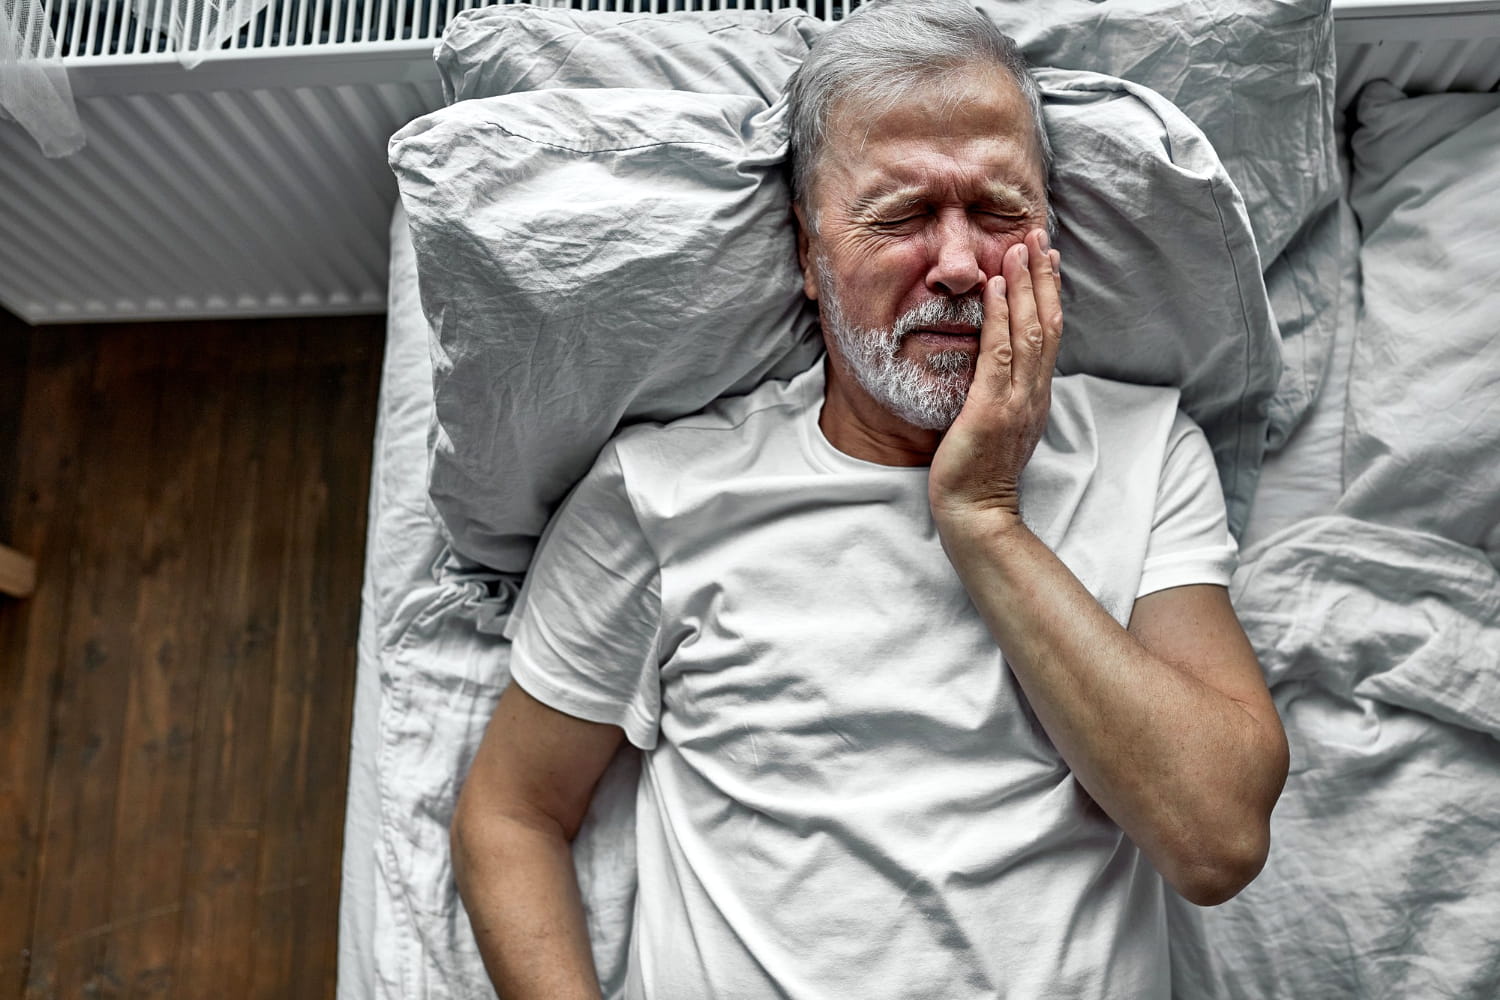 Older man laying in bed with tooth pain